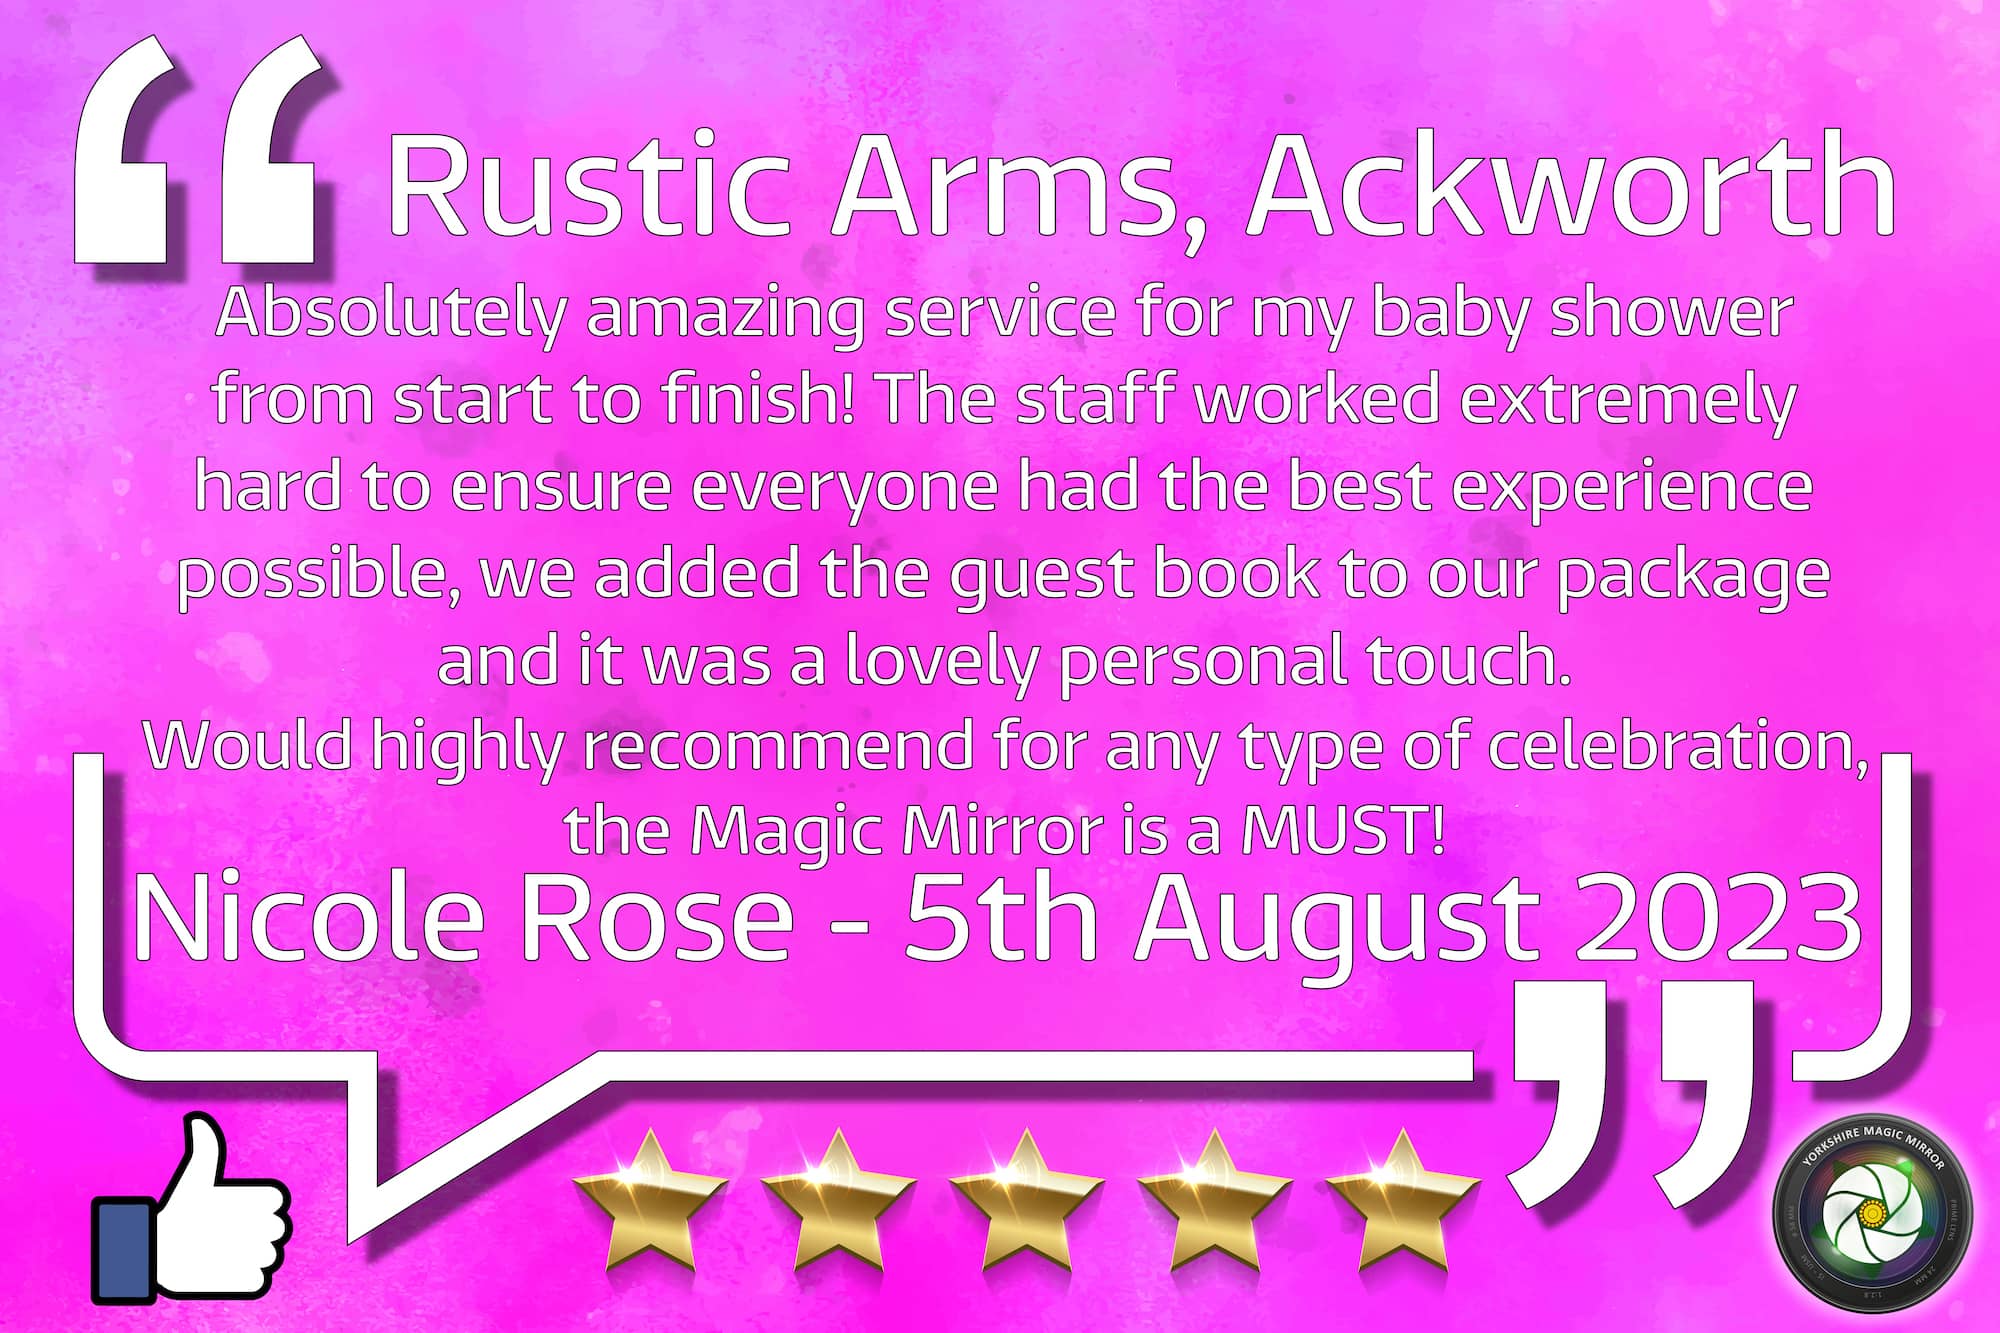 Nicole Rose Baby Shower August 2023 Rustic Arms Ackworth